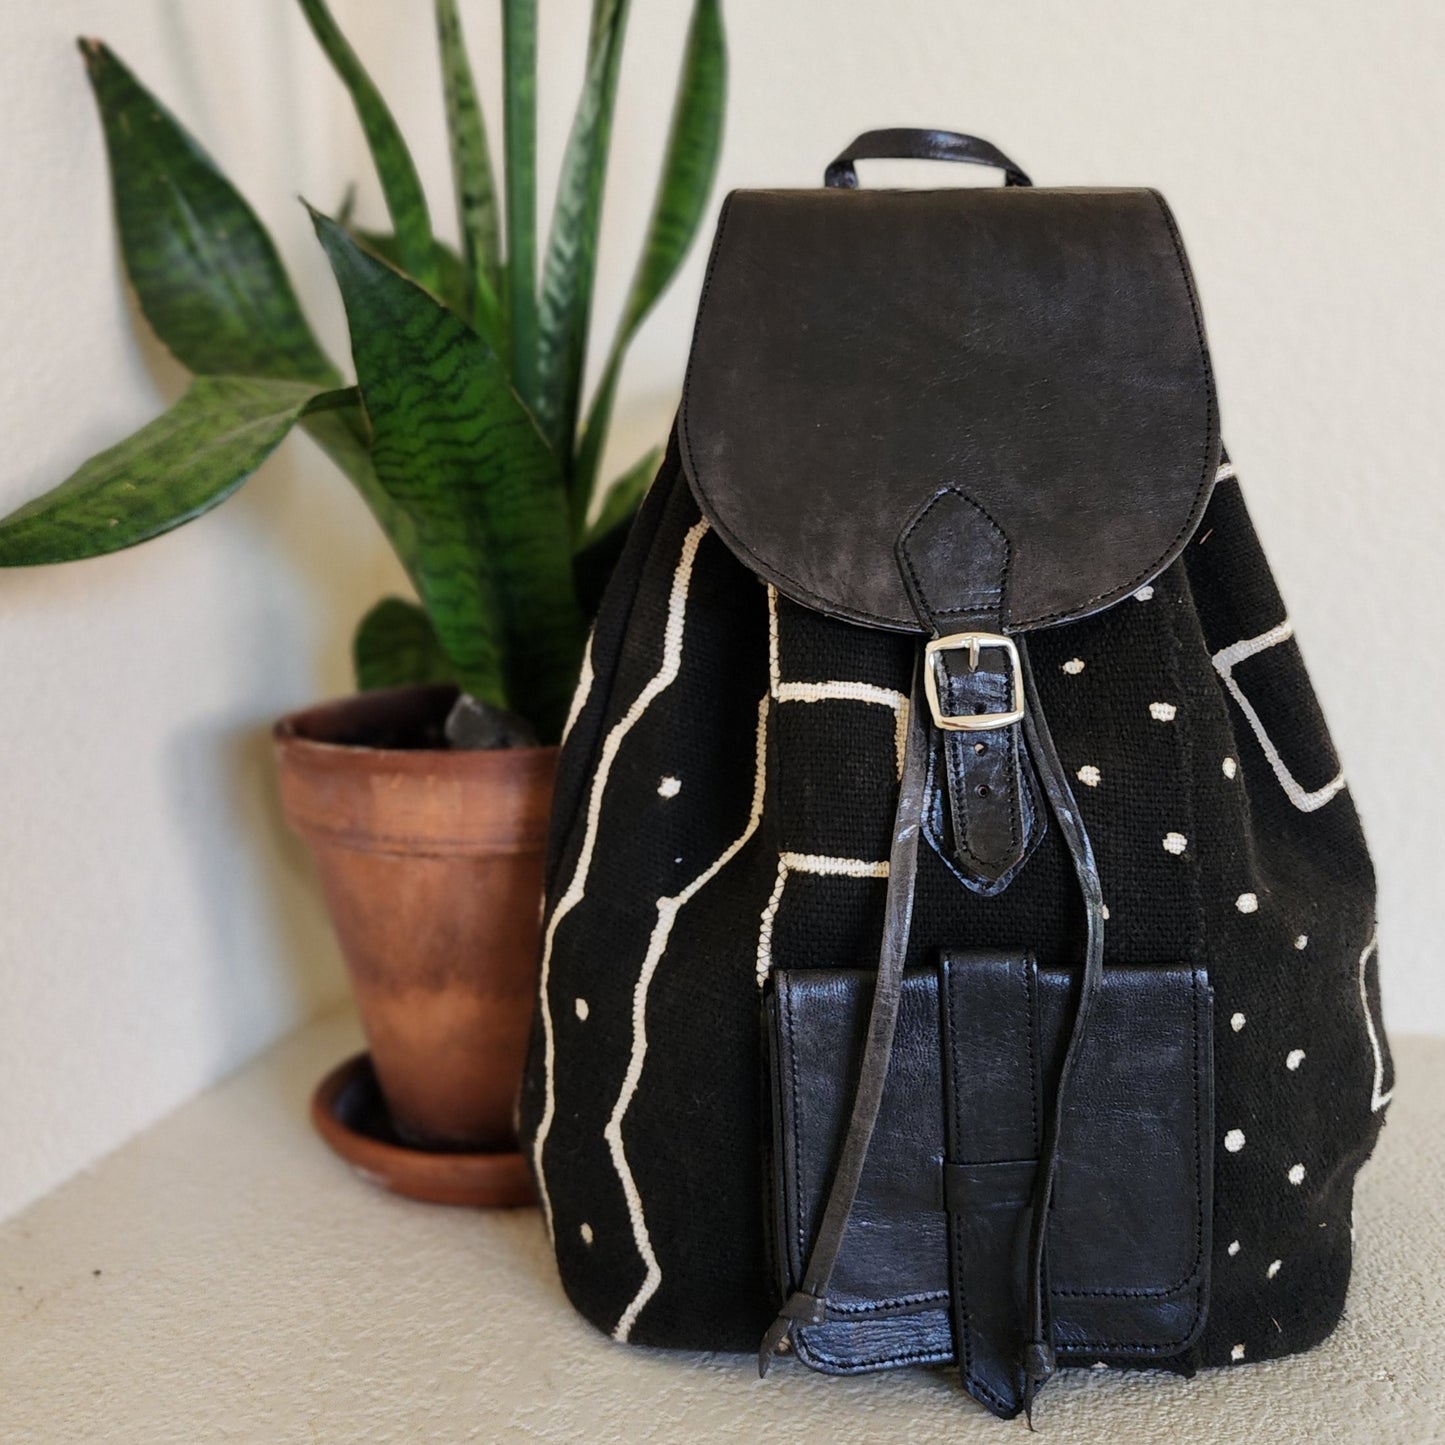 Black mudcloth backpack with black leather